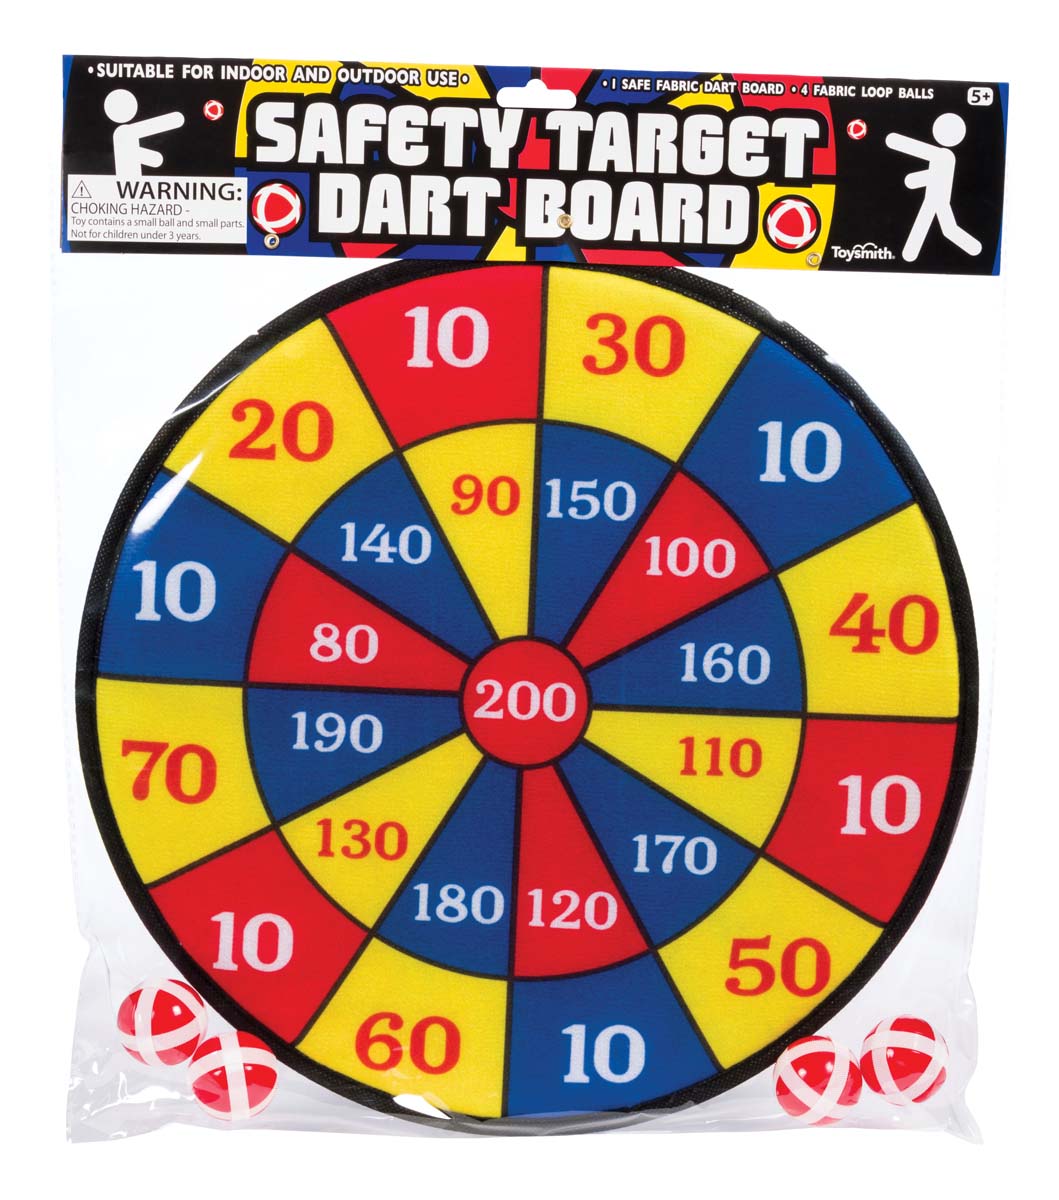 Safety target dart board in package with 4 balls